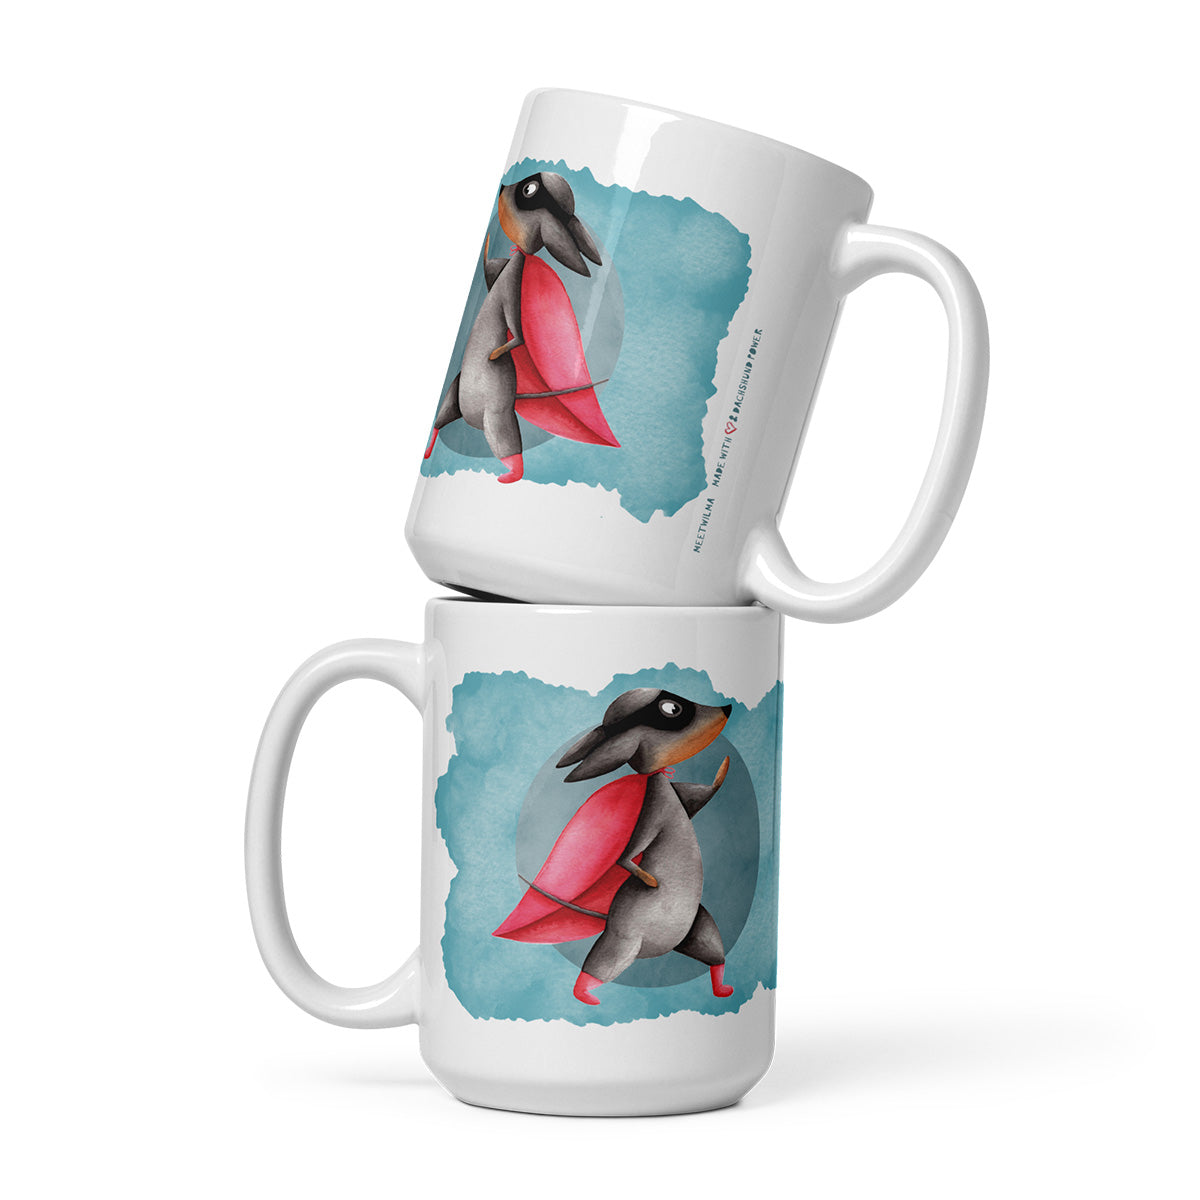 2 stacked Mugs with a Dachshund wearing a cape watercolor Illustration print - 15oz